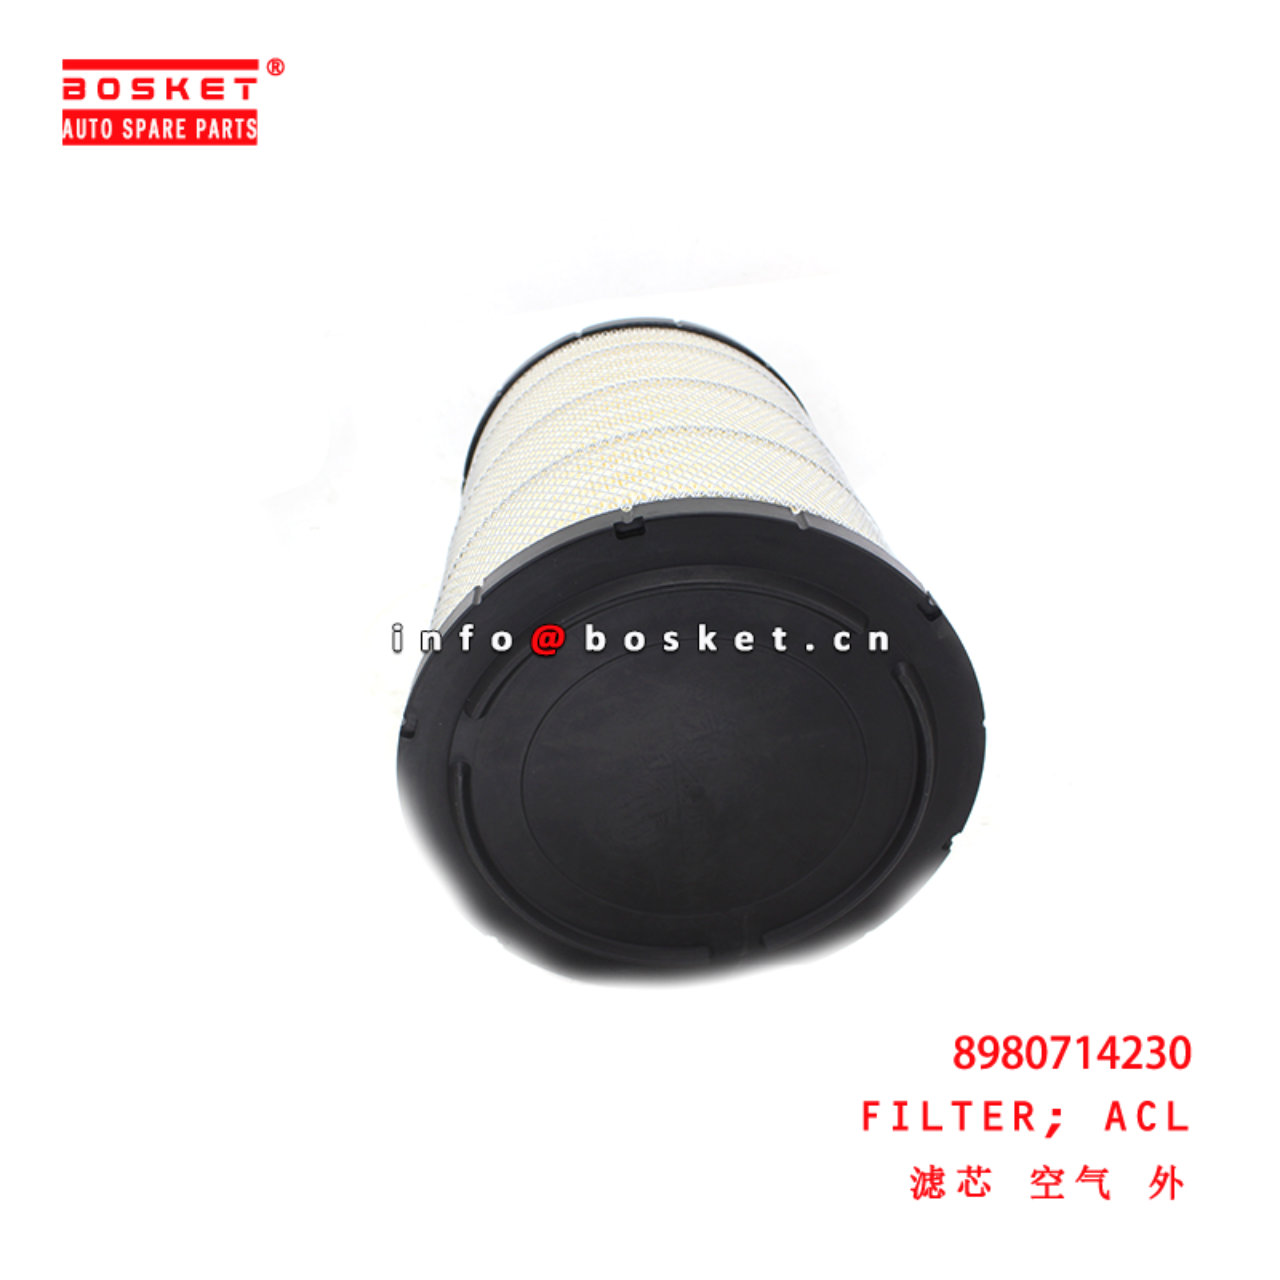 8-98071423-0 Air Cleaner Filter suitable for ISUZU FVM GVR 6HK1 8980714230